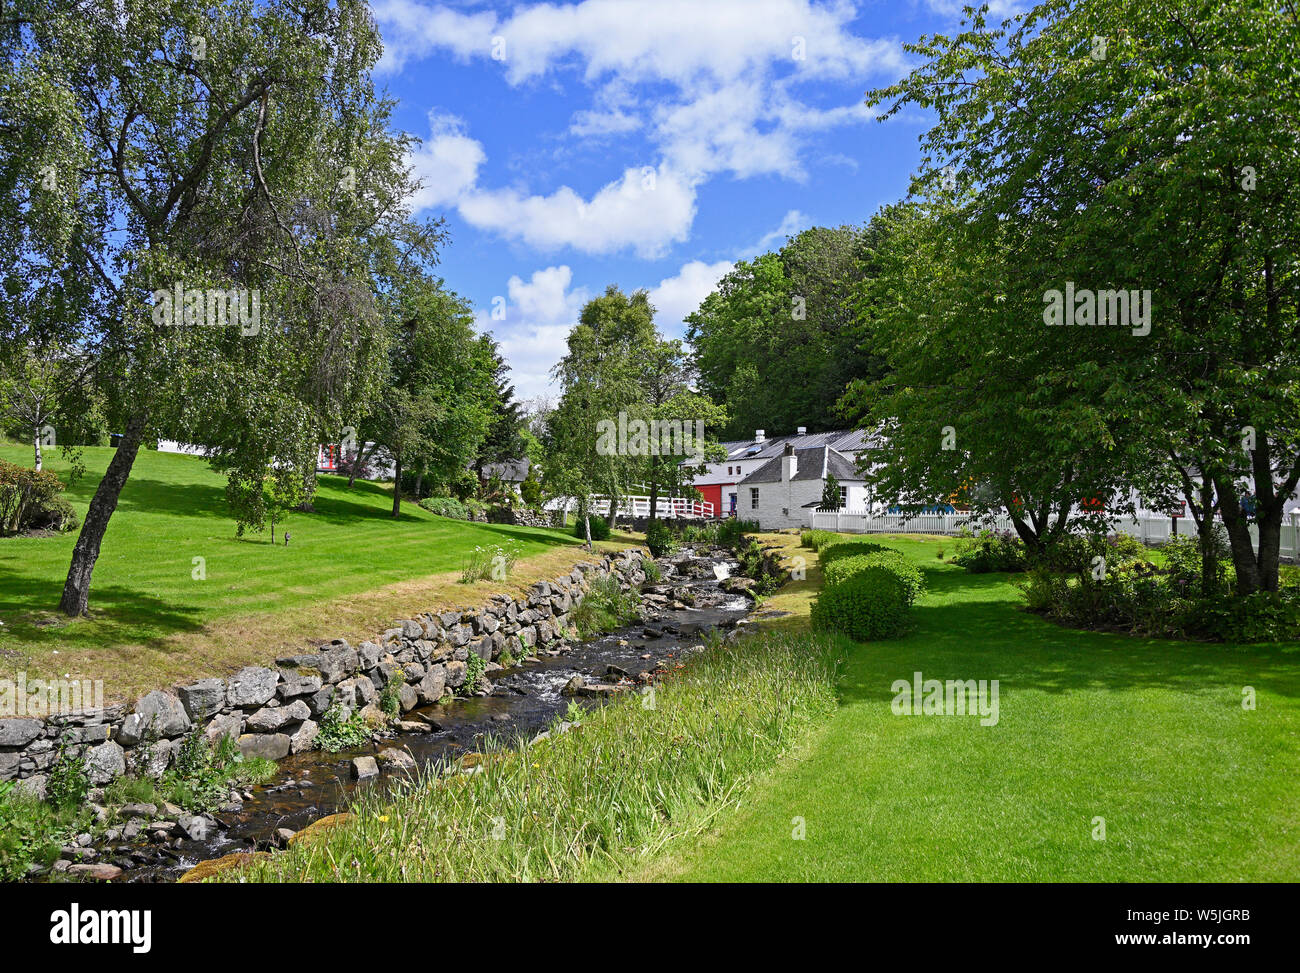 Eradour Whisky Distillery. Pitlochry, Perth and Kinross, Scotland, United Kingdom, Europe. Stock Photo